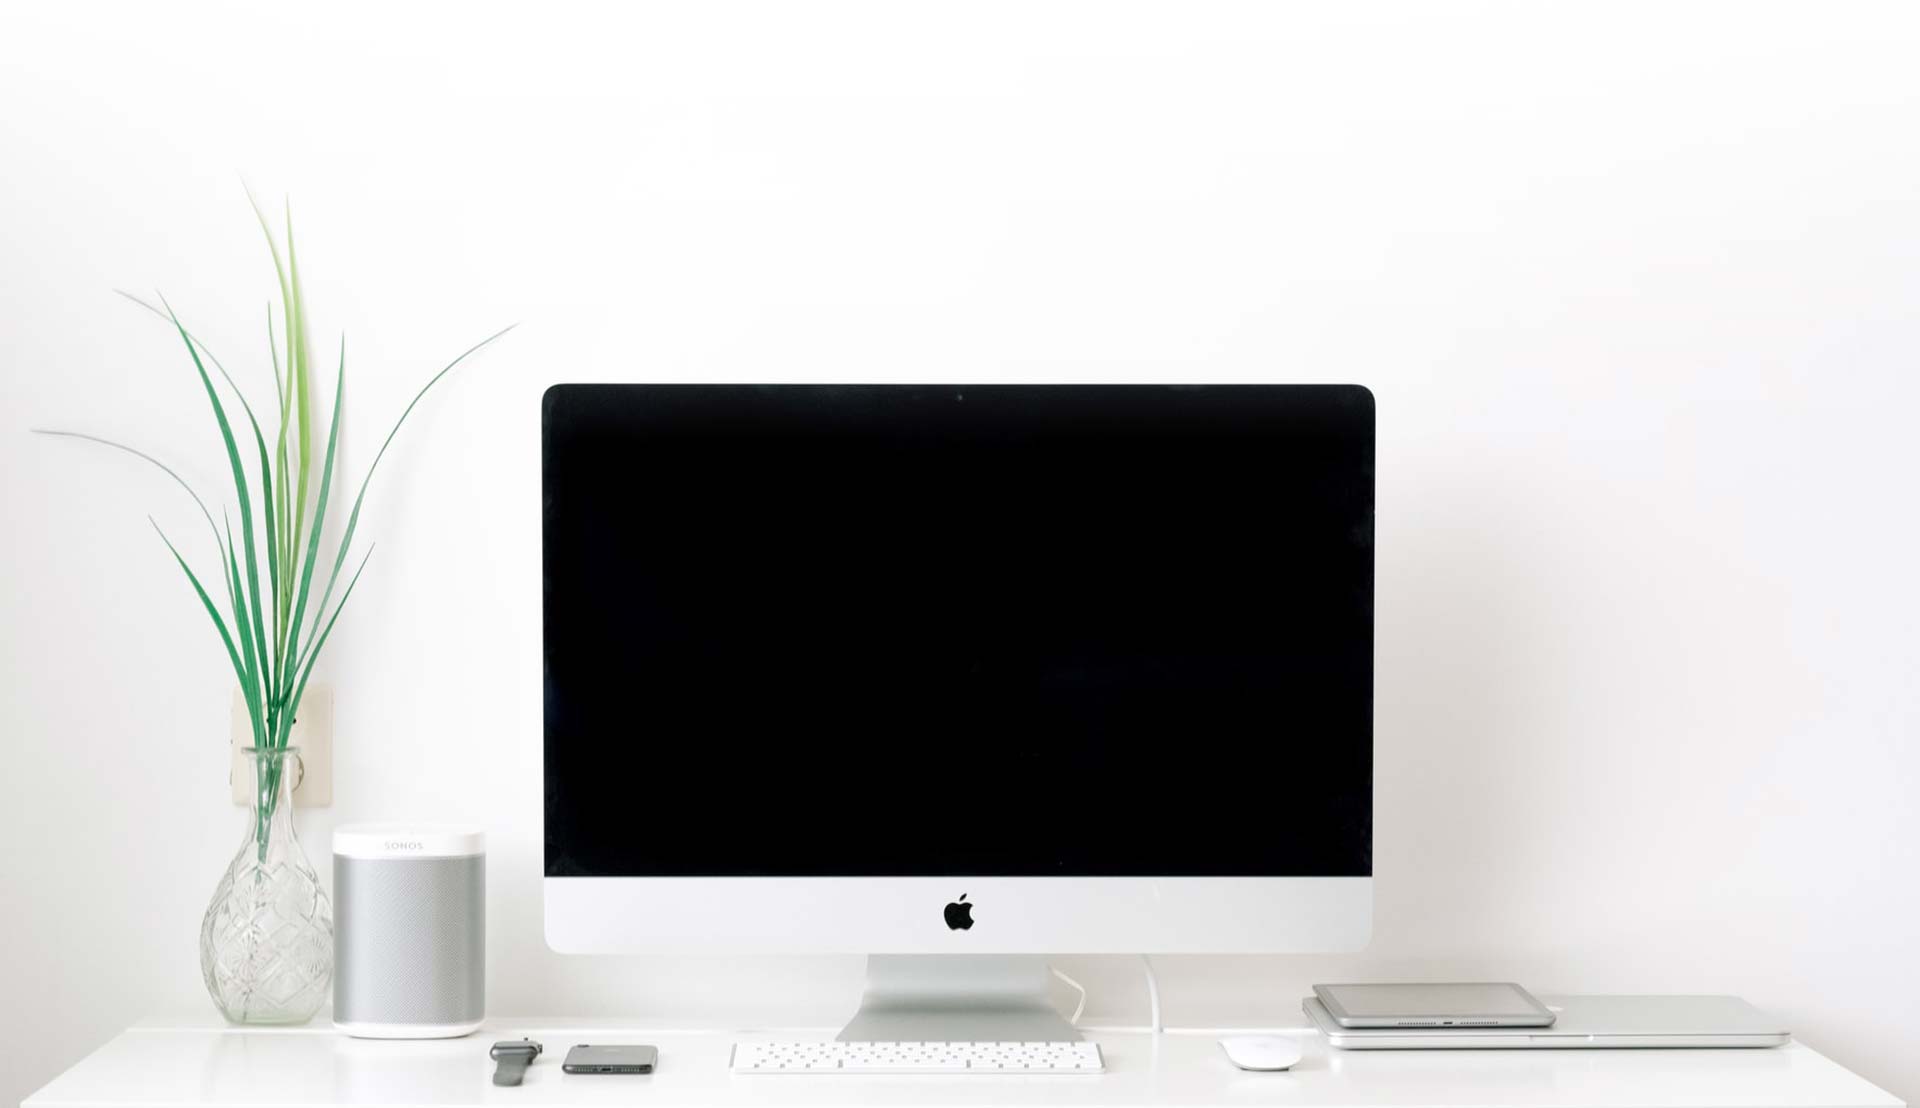 Sonos speakers on a white desk next to an iMac